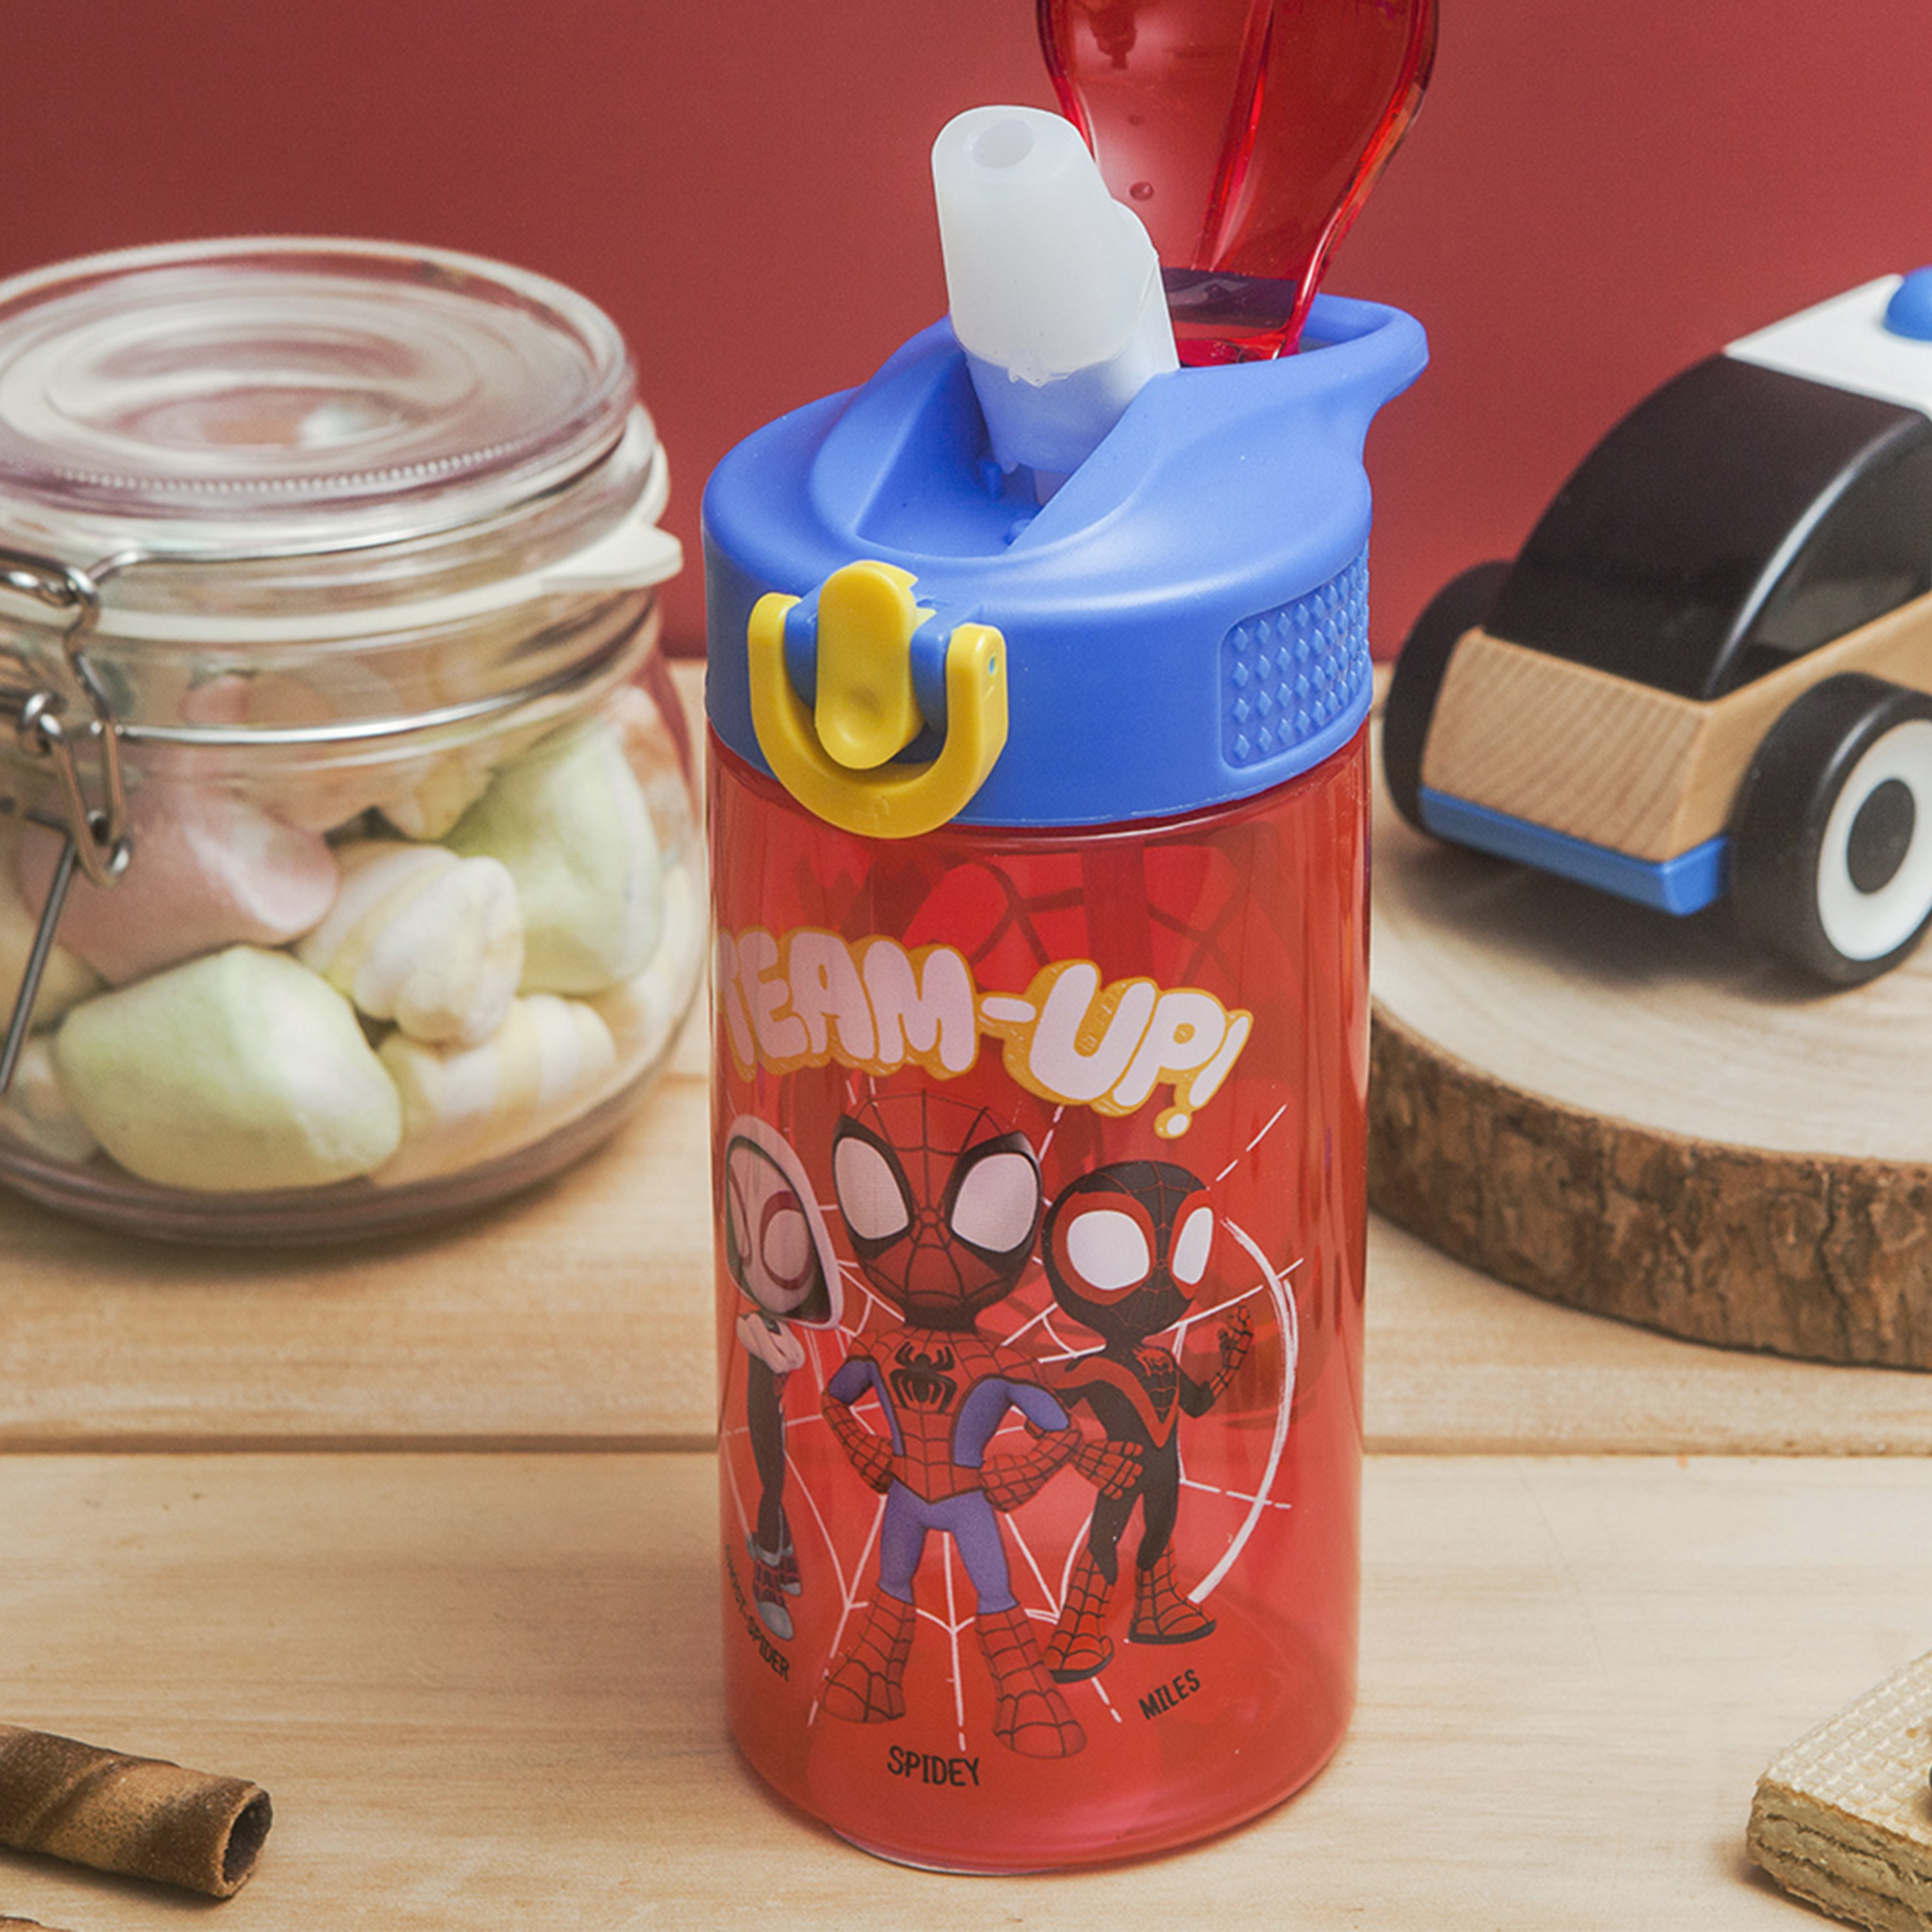 Spider-Man and His Amazing Friends 16 ounce Reusable Plastic Water Bottle with Straw, Spider-Friends, 2-piece set slideshow image 4